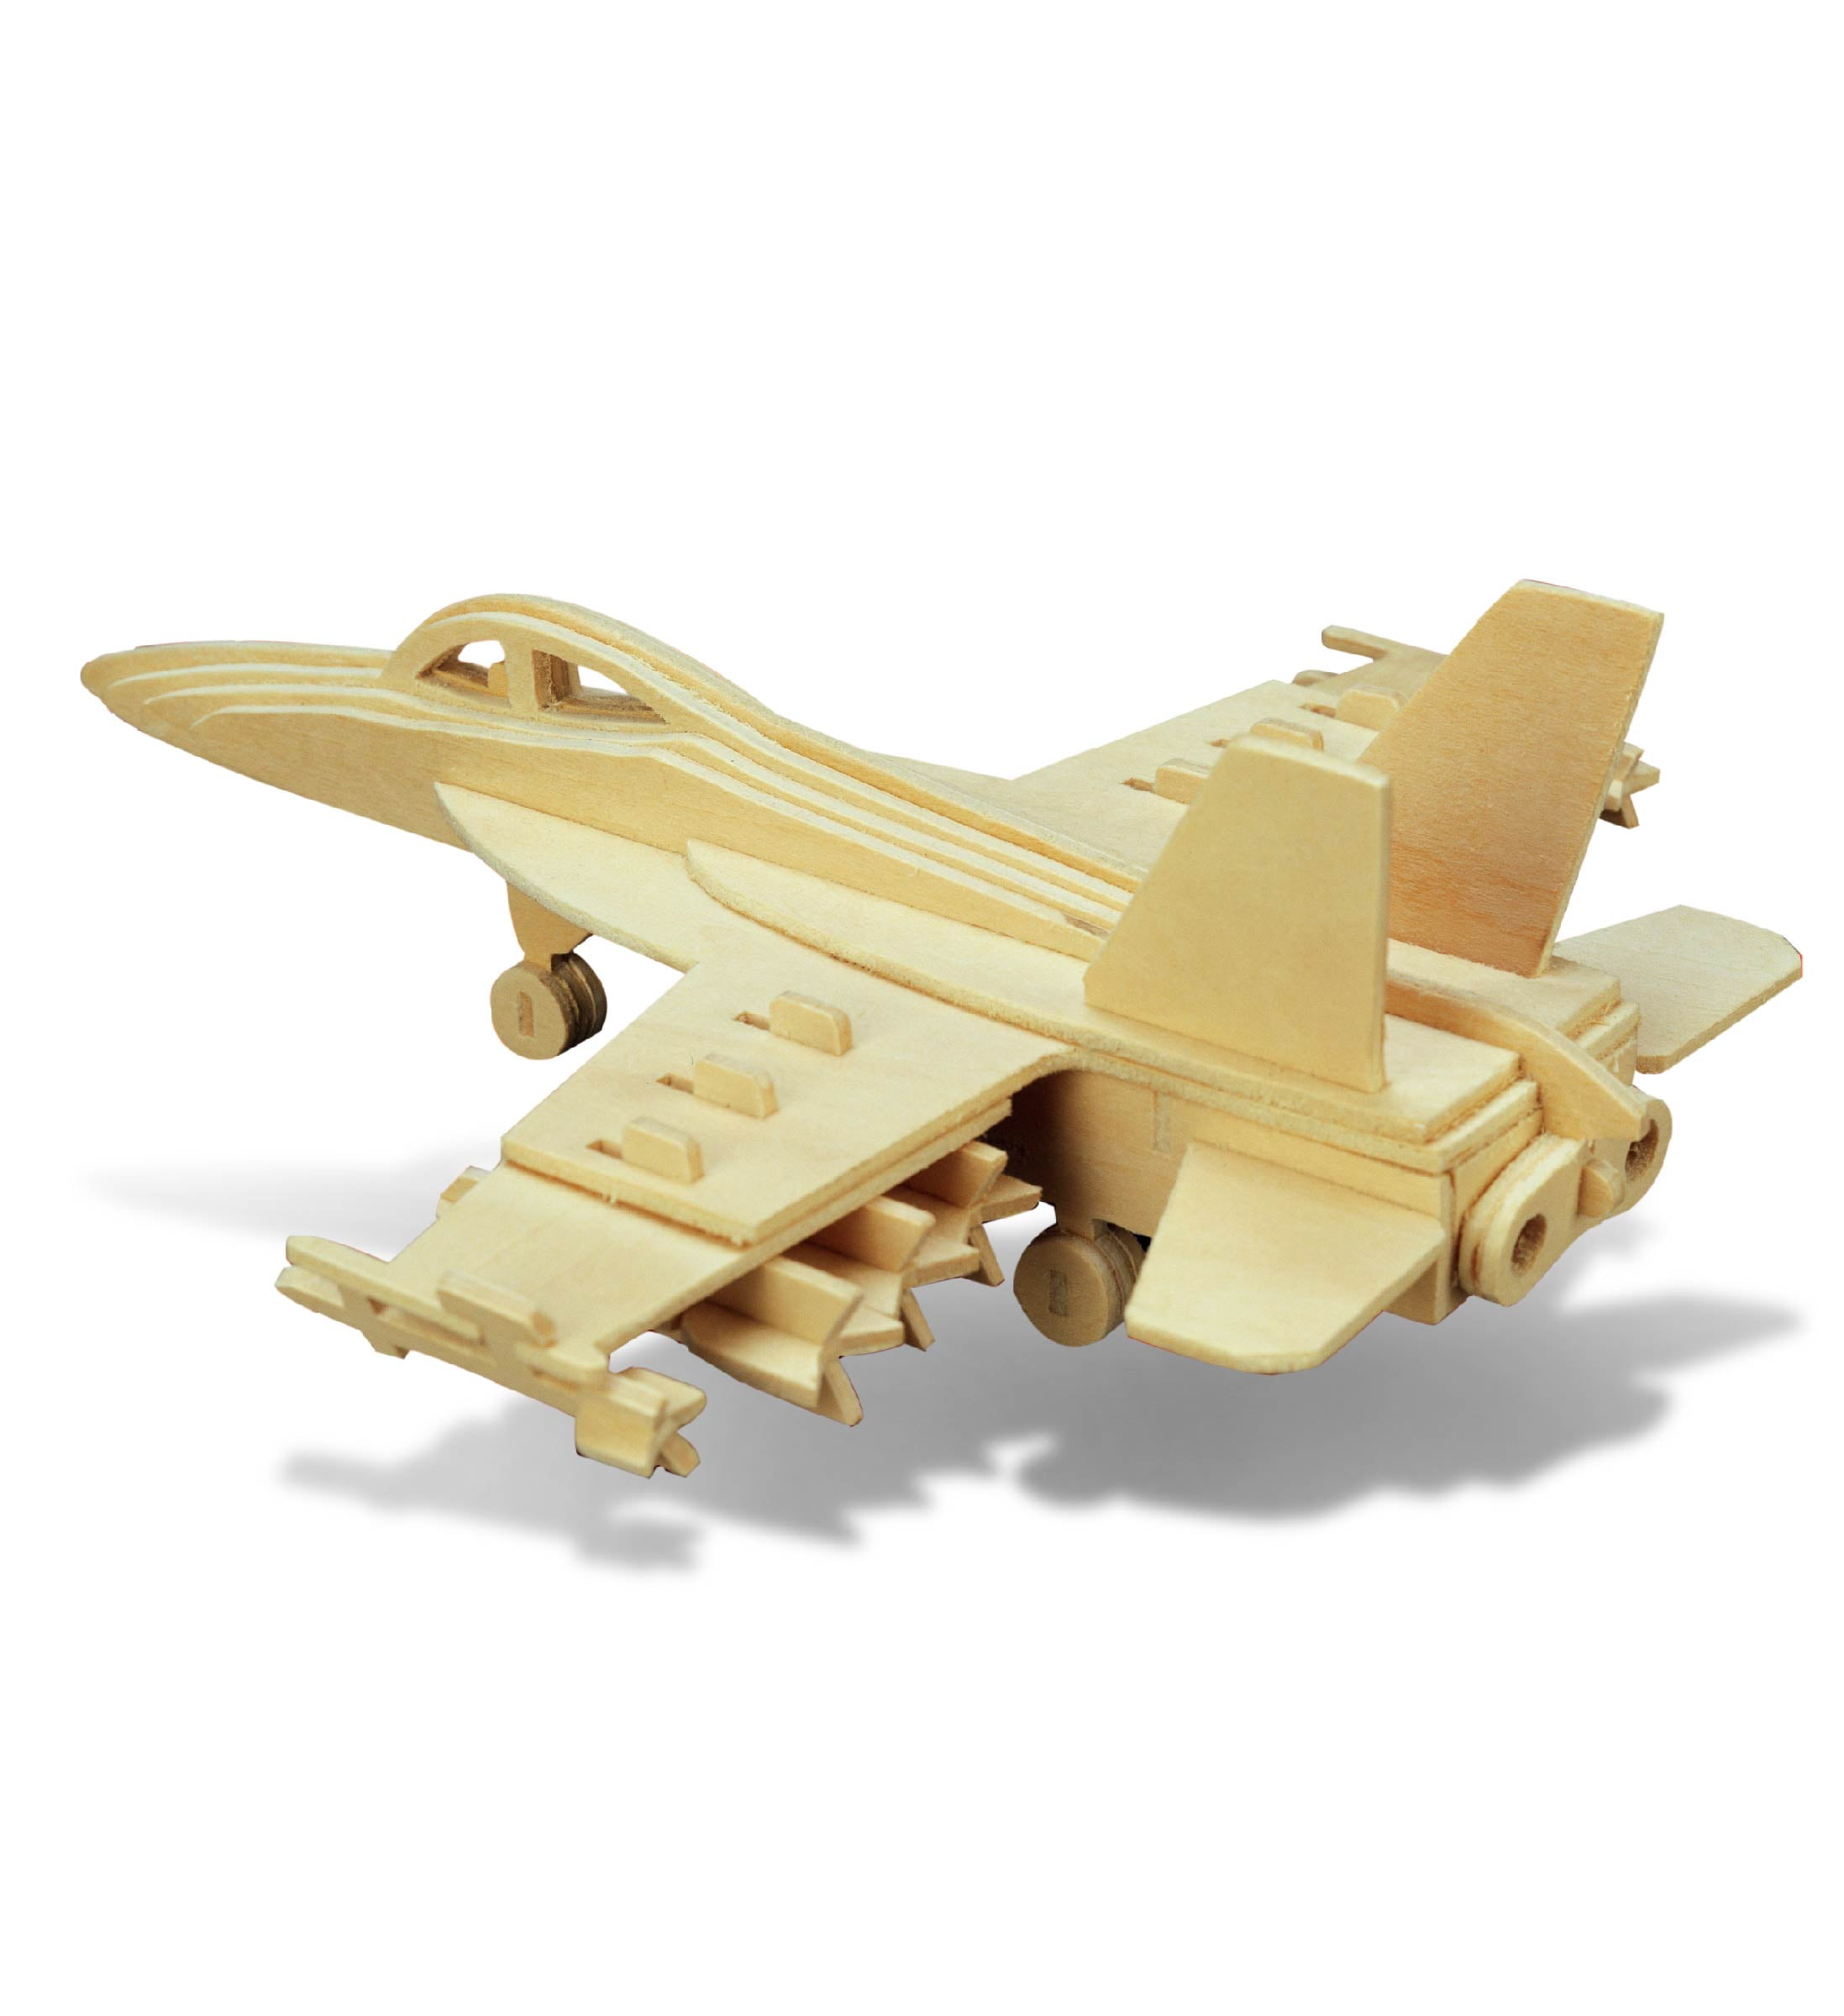 Woodcraft Construction Kit 3D Wooden Puzzles Ancient Fighter Carriage Model 